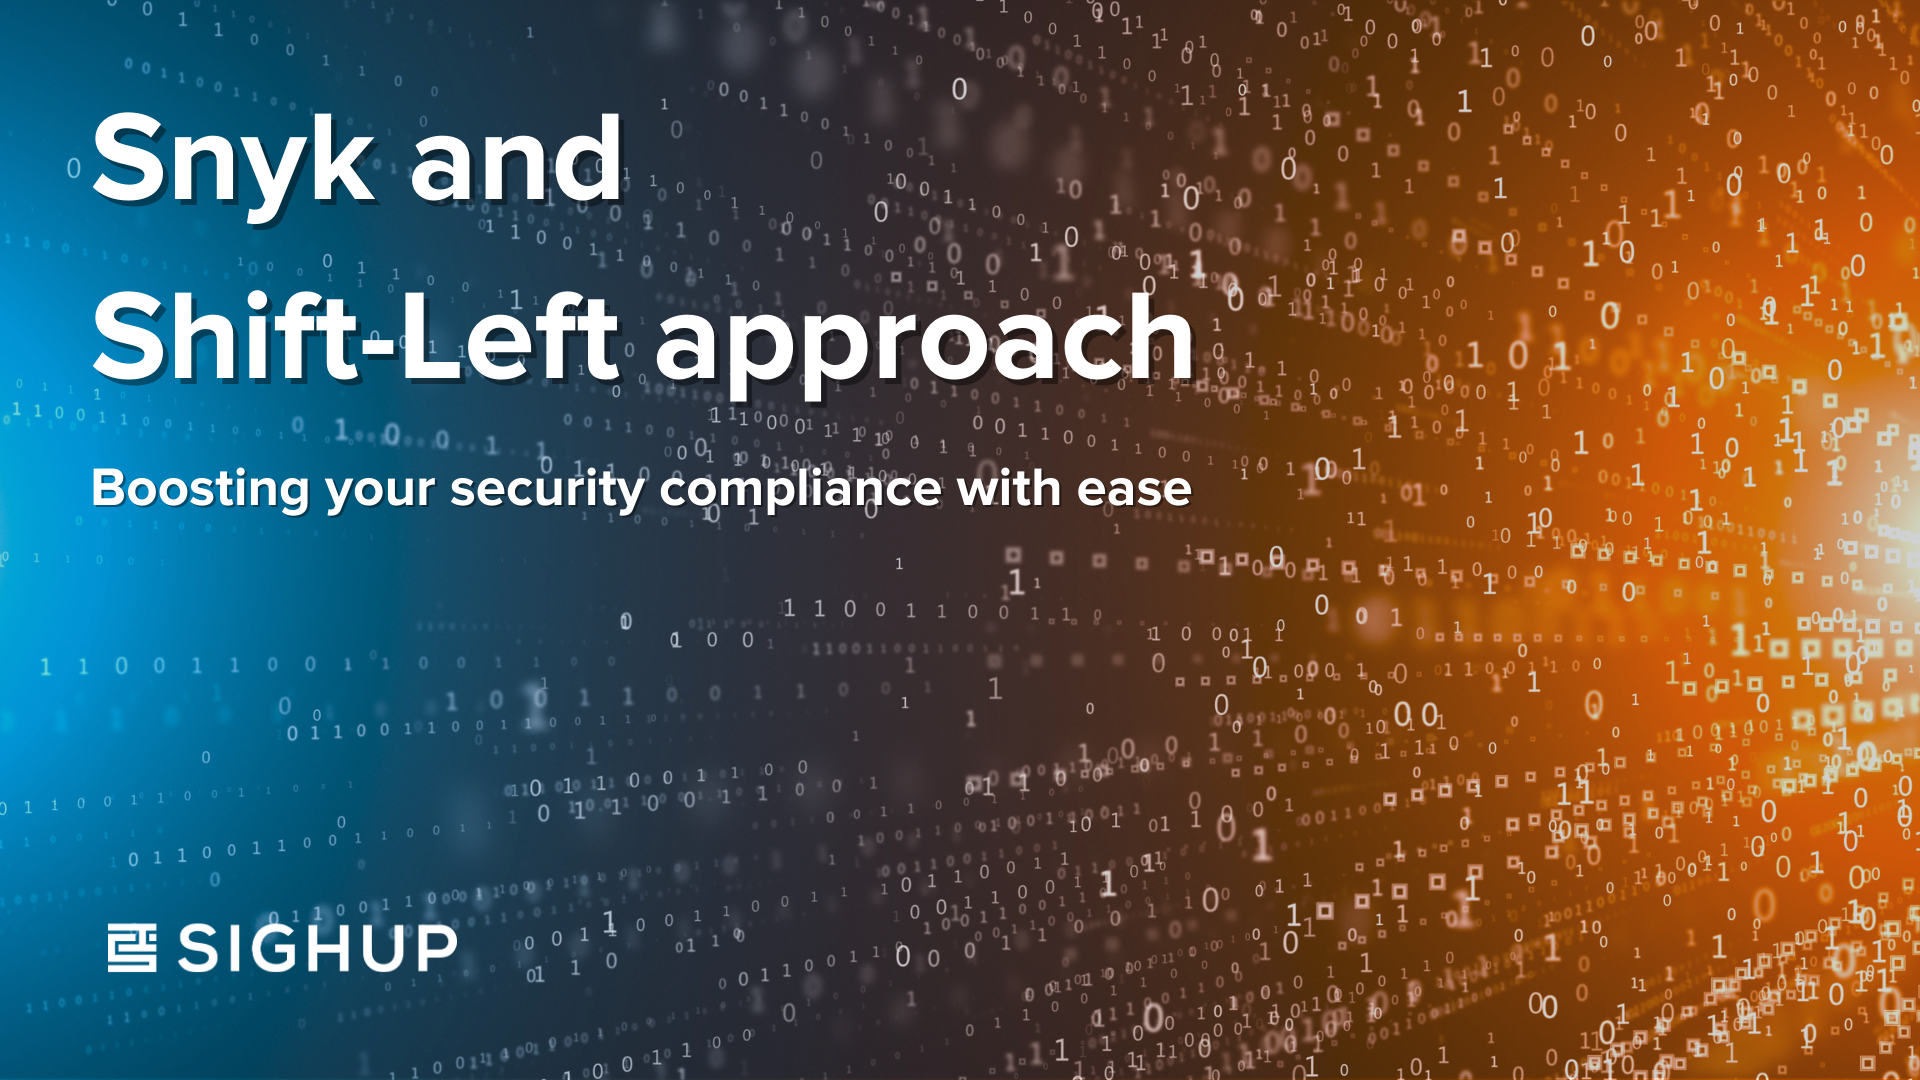 Snyk and Shift-Left approach: Boosting your security compliance with ease.